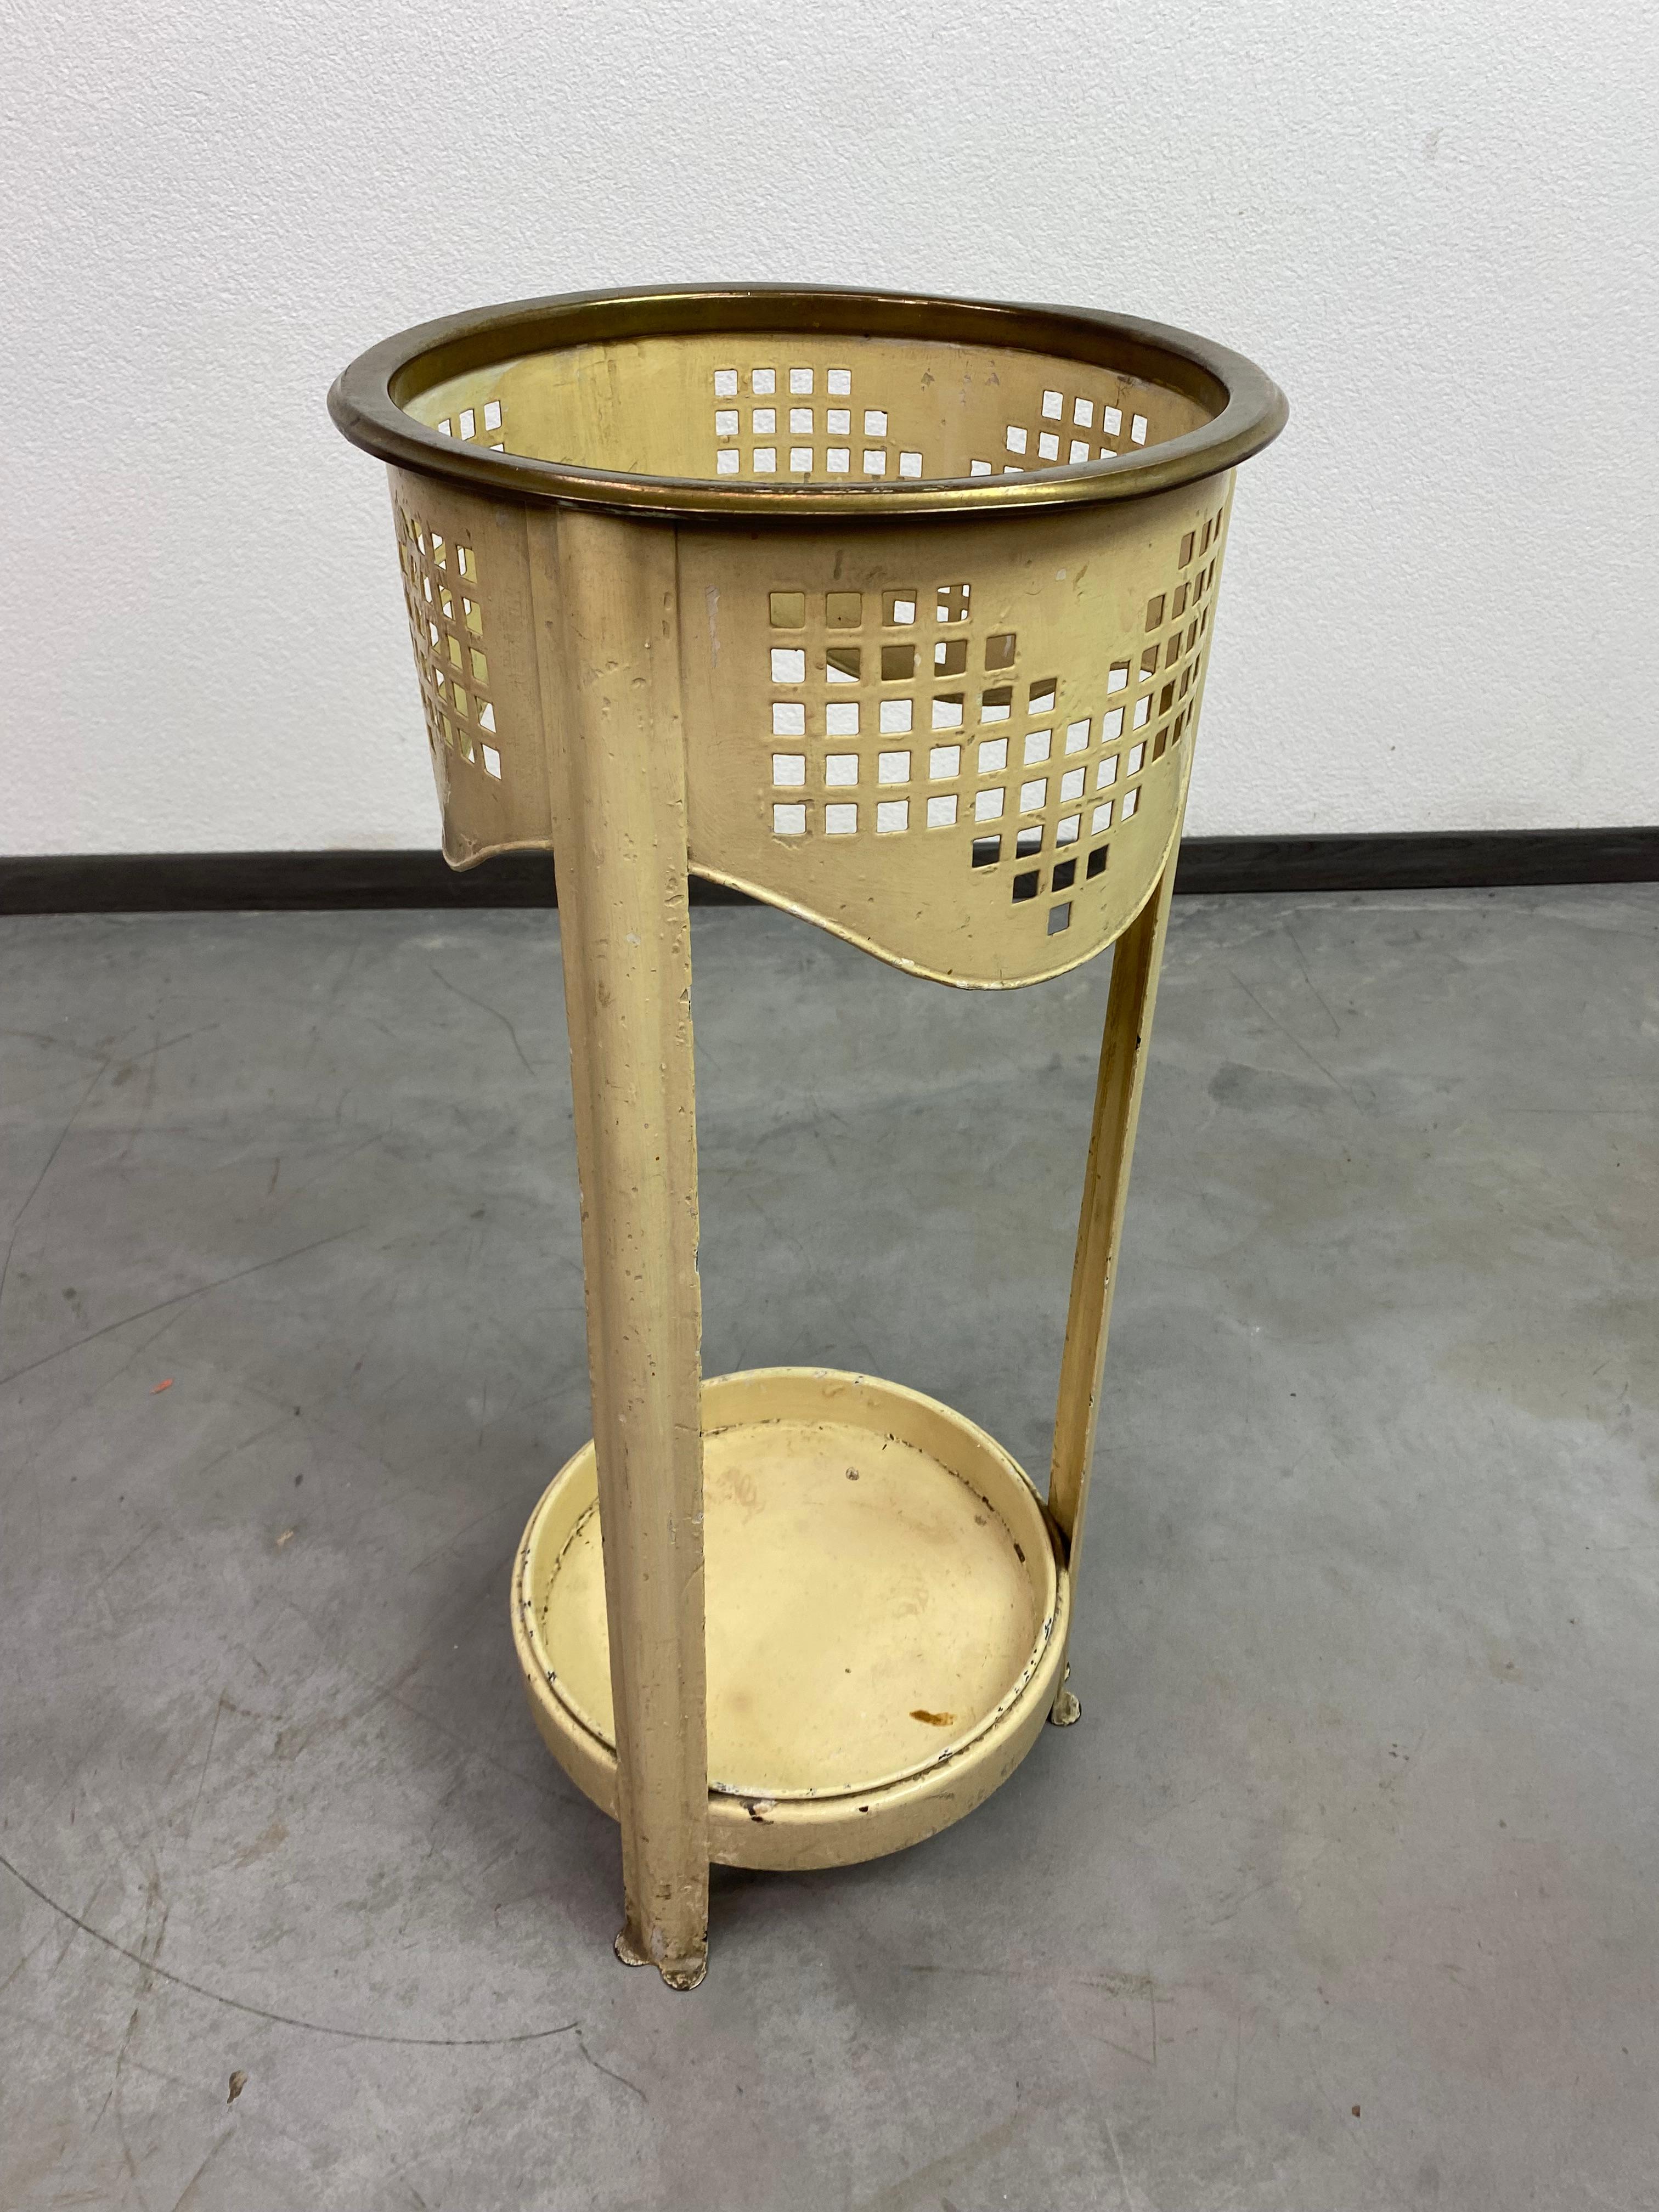 Vienna Secession Umbrella stand attributed to Josef Hoffmann - Kolo Moser For Sale